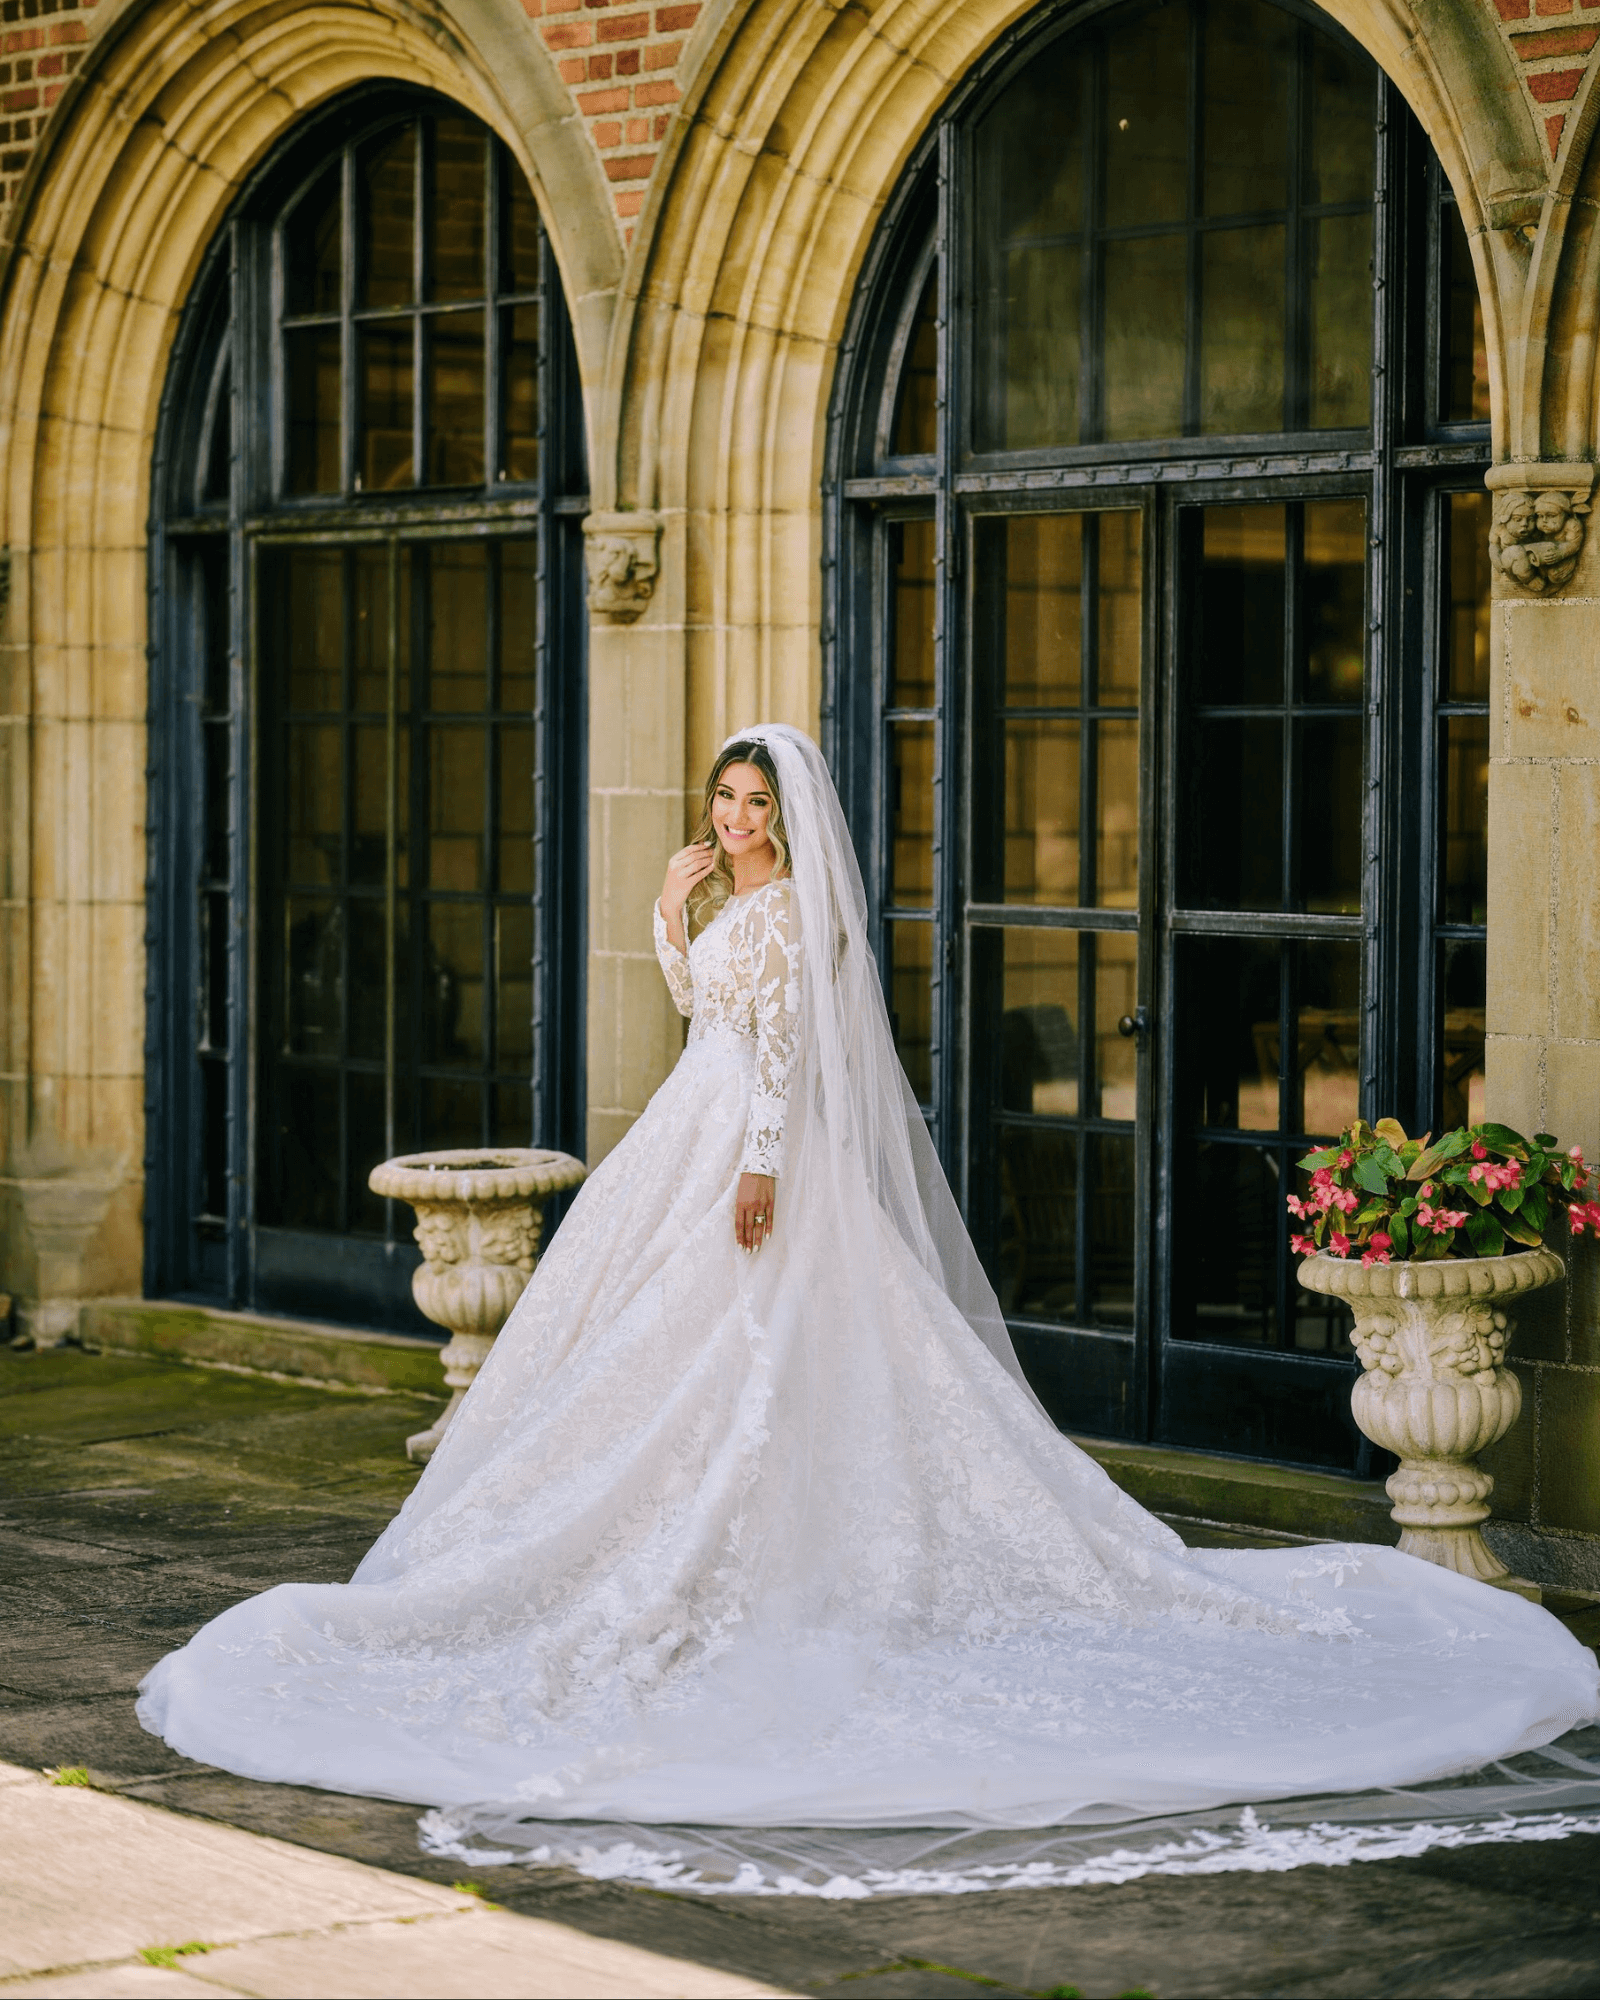 Bride in long sleeve ball gown with an elegant veil